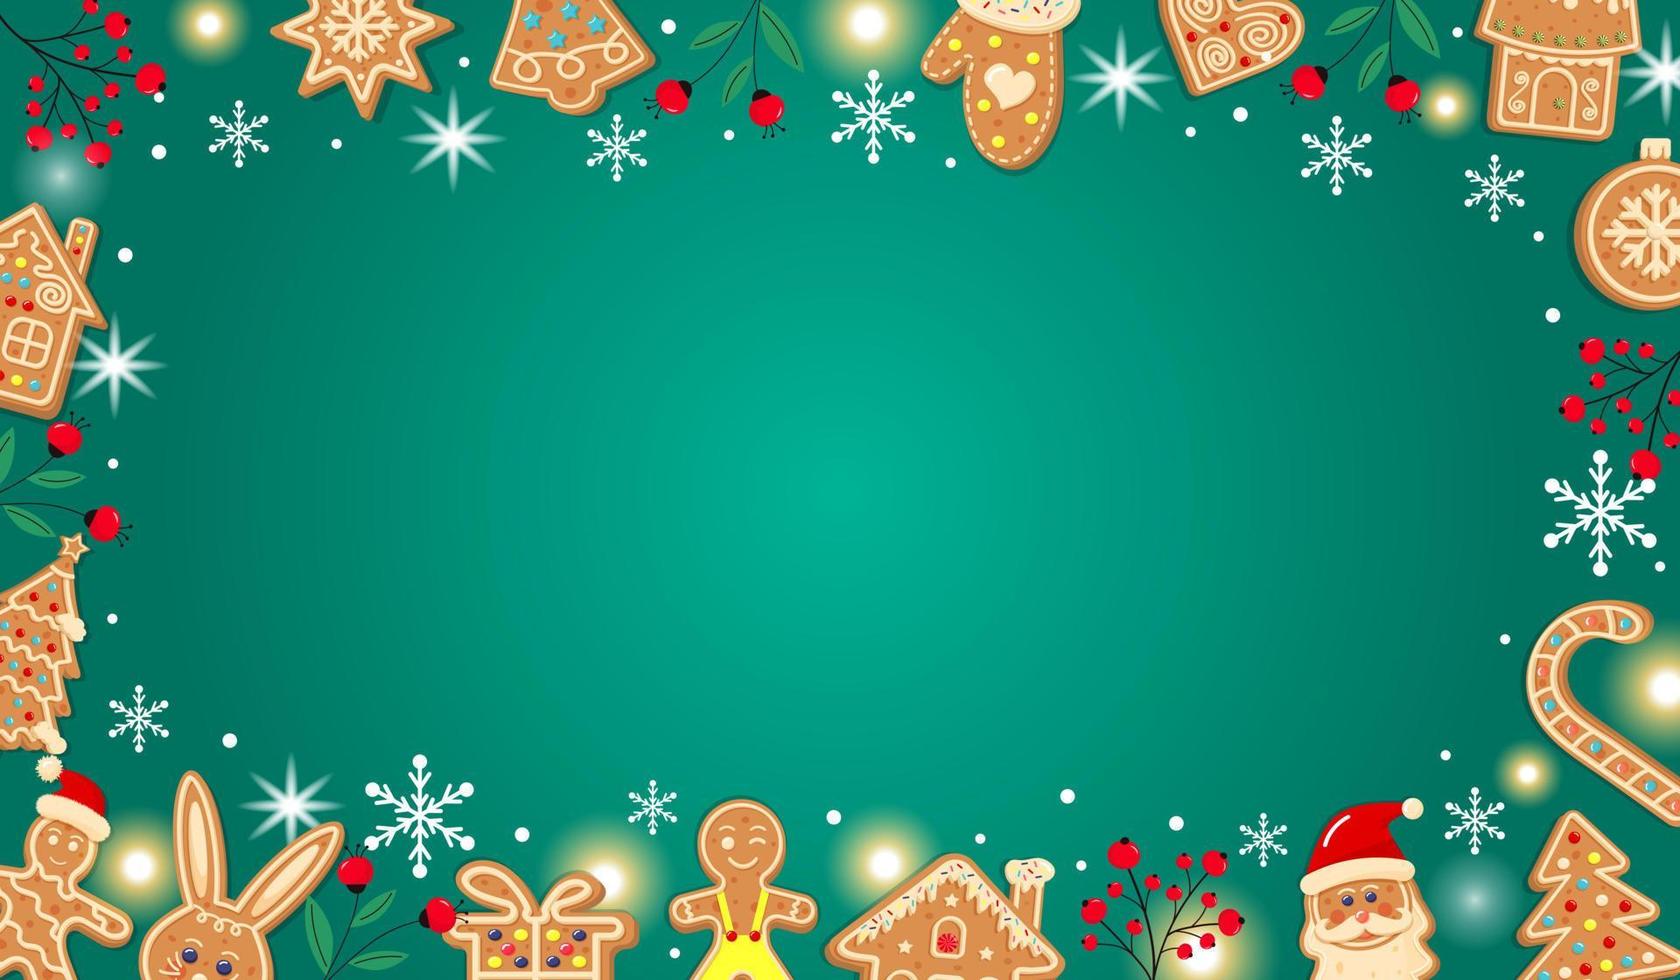 Horizontal green Christmas gingerbread background. Xmas design with cookies, winter berries, snowflakes, snow and lights. Empty space for your text. Template for cards, banner, poster, invitation. vector